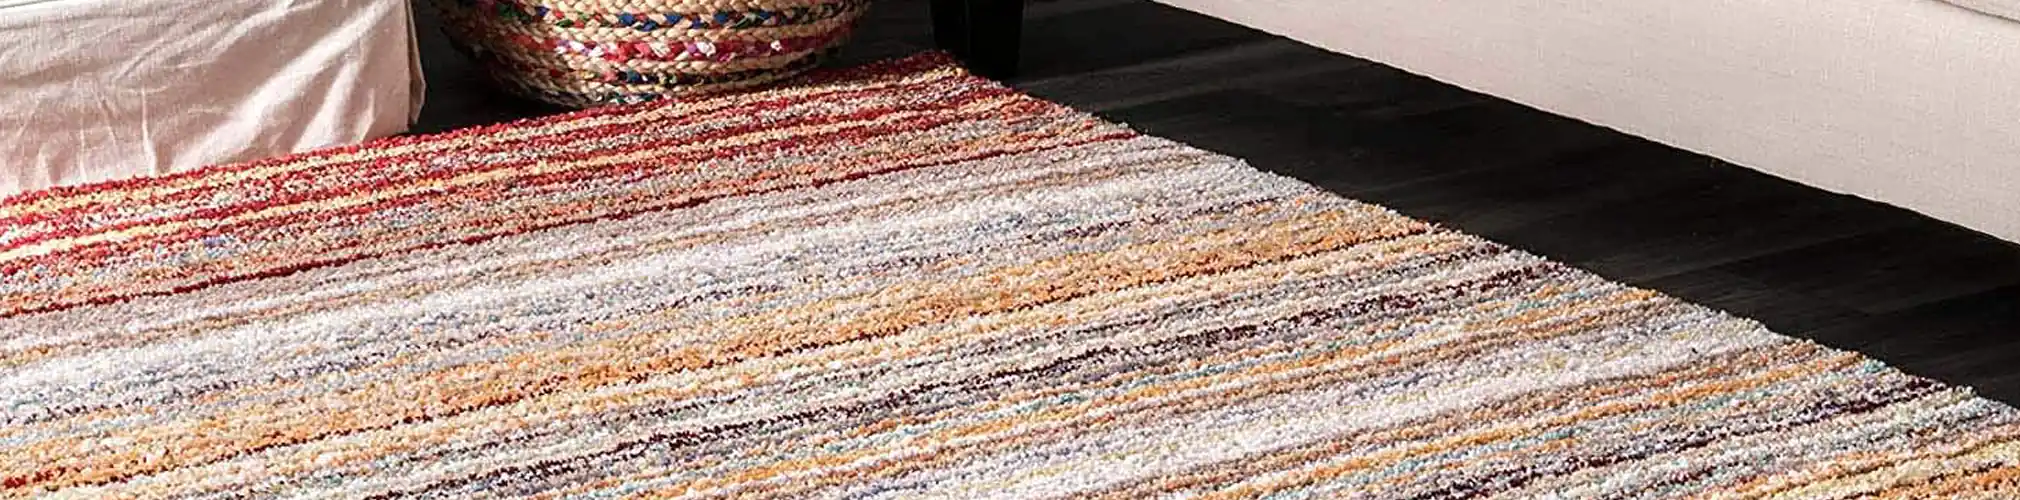 Oriental Rug Cleaning Services Miami